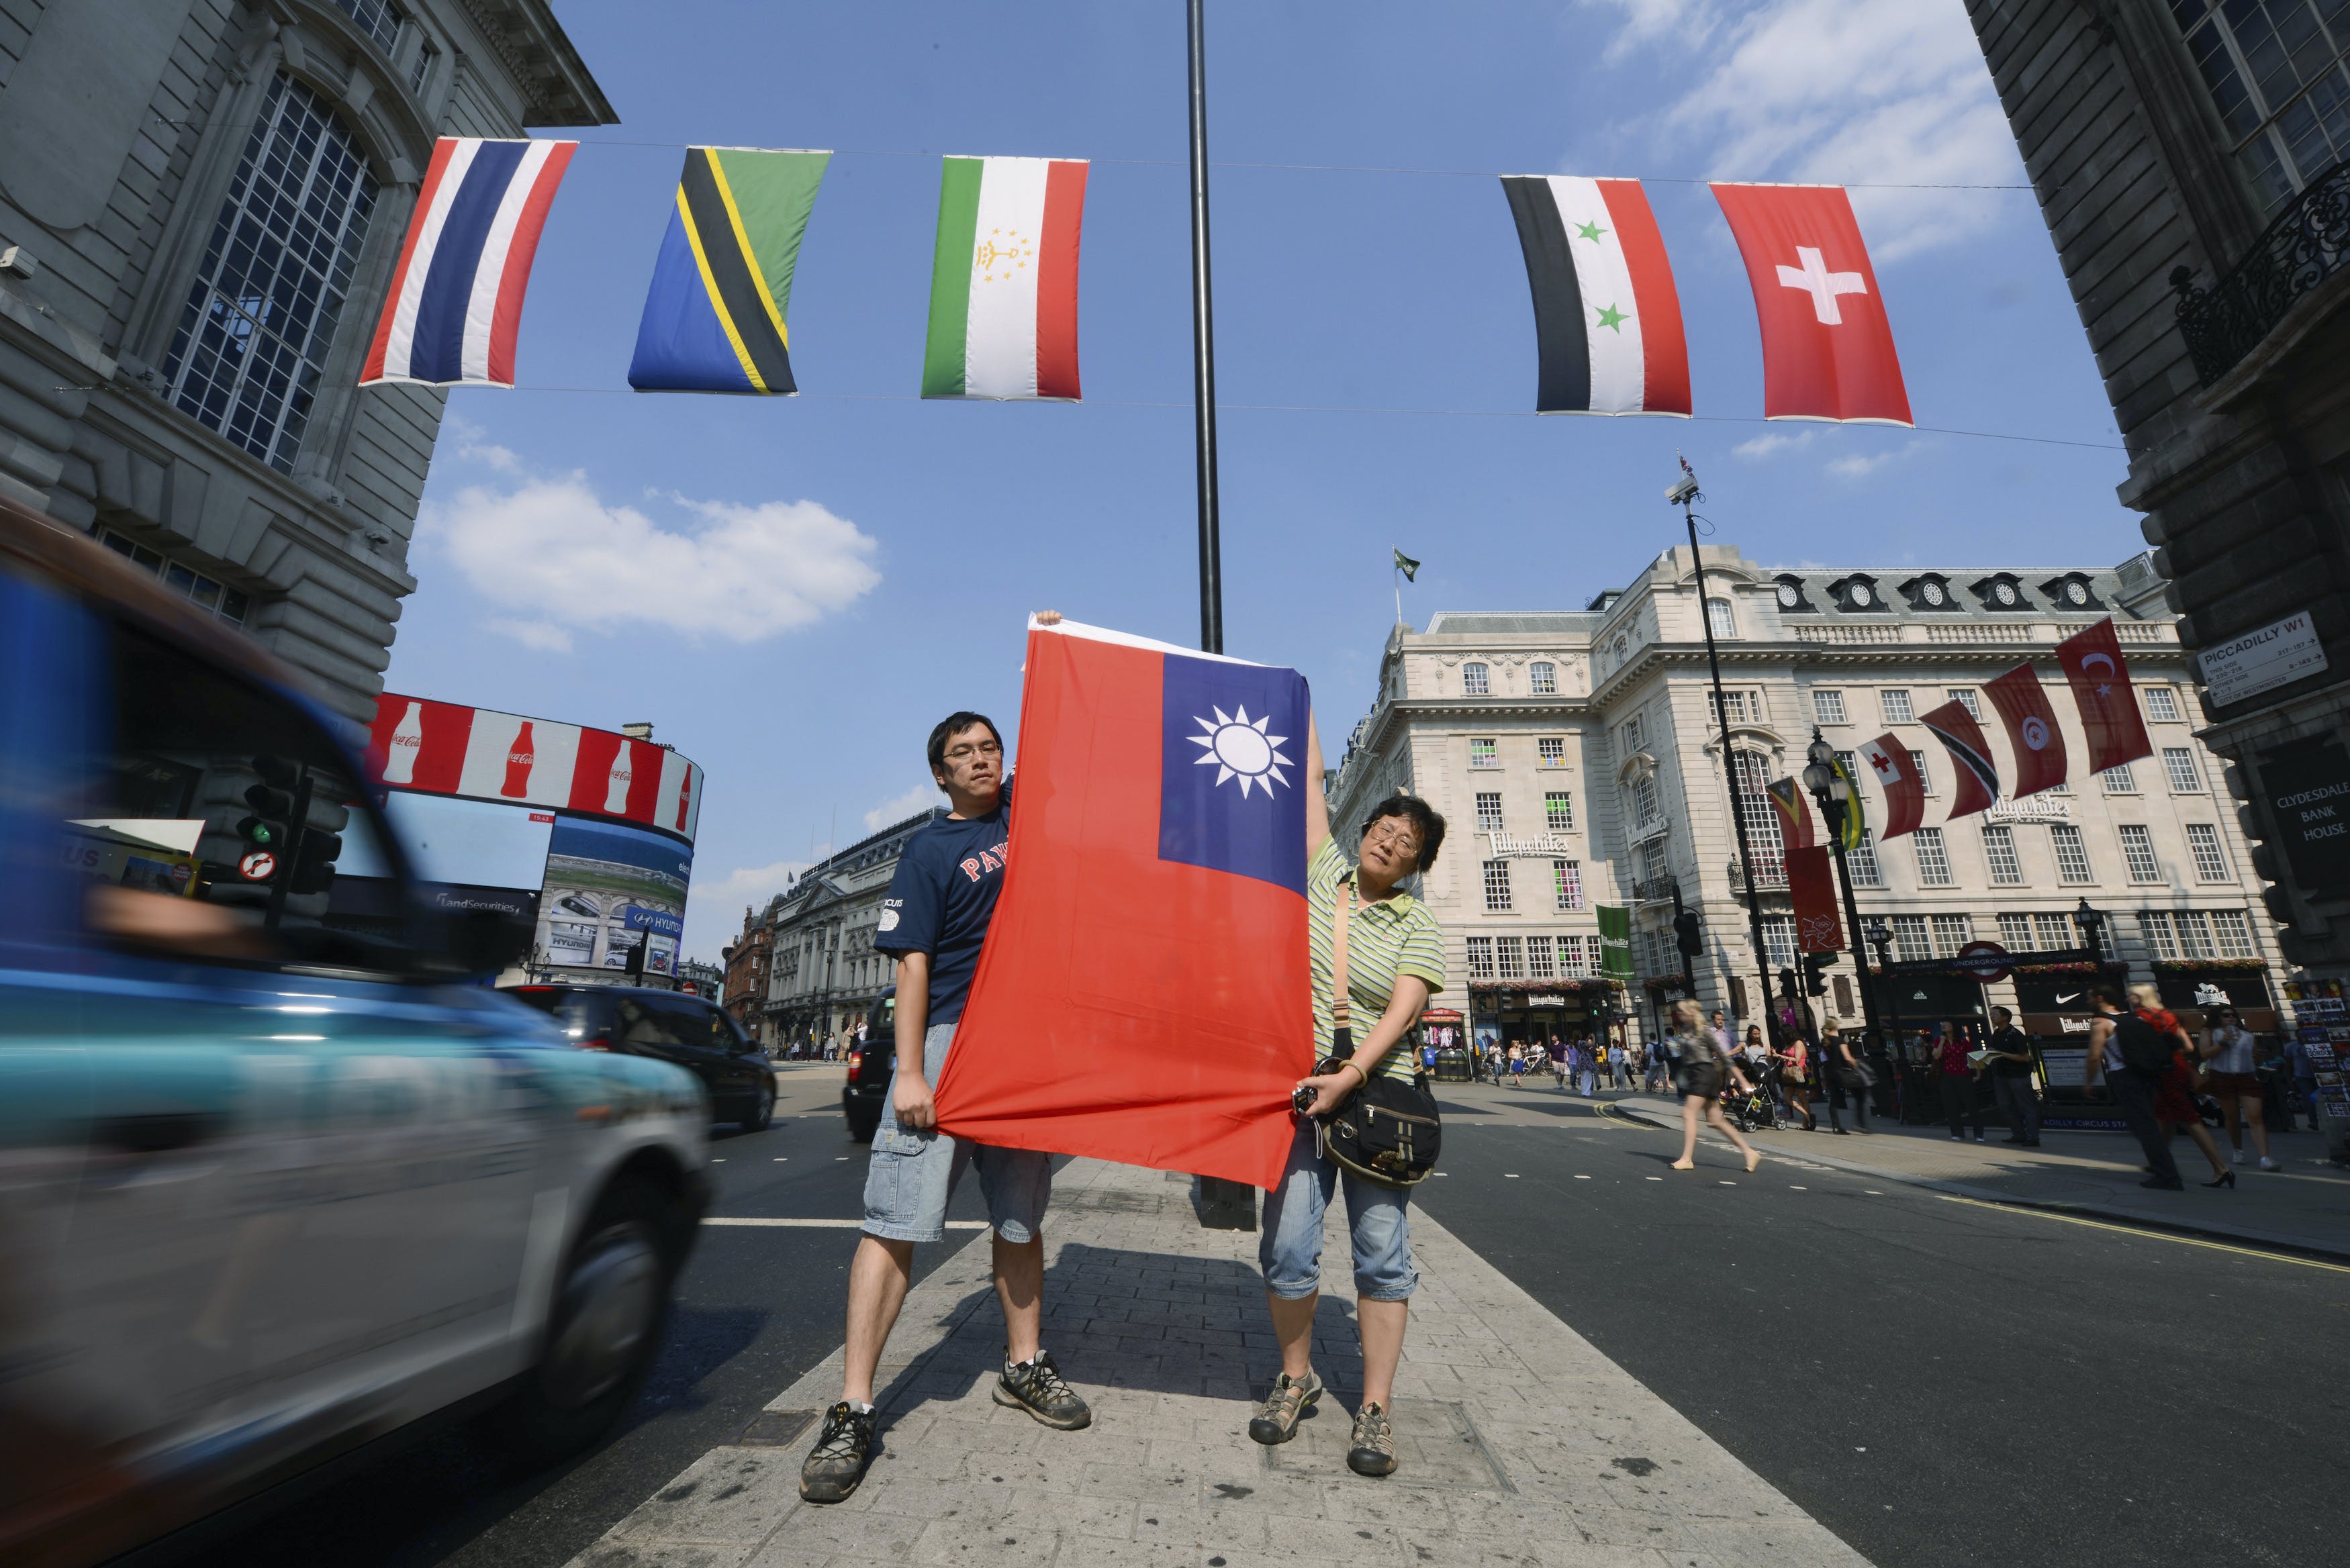 Two Taiwanese citizens hold up the flag of Taiwan at the retail district of Lower Regents Street in London